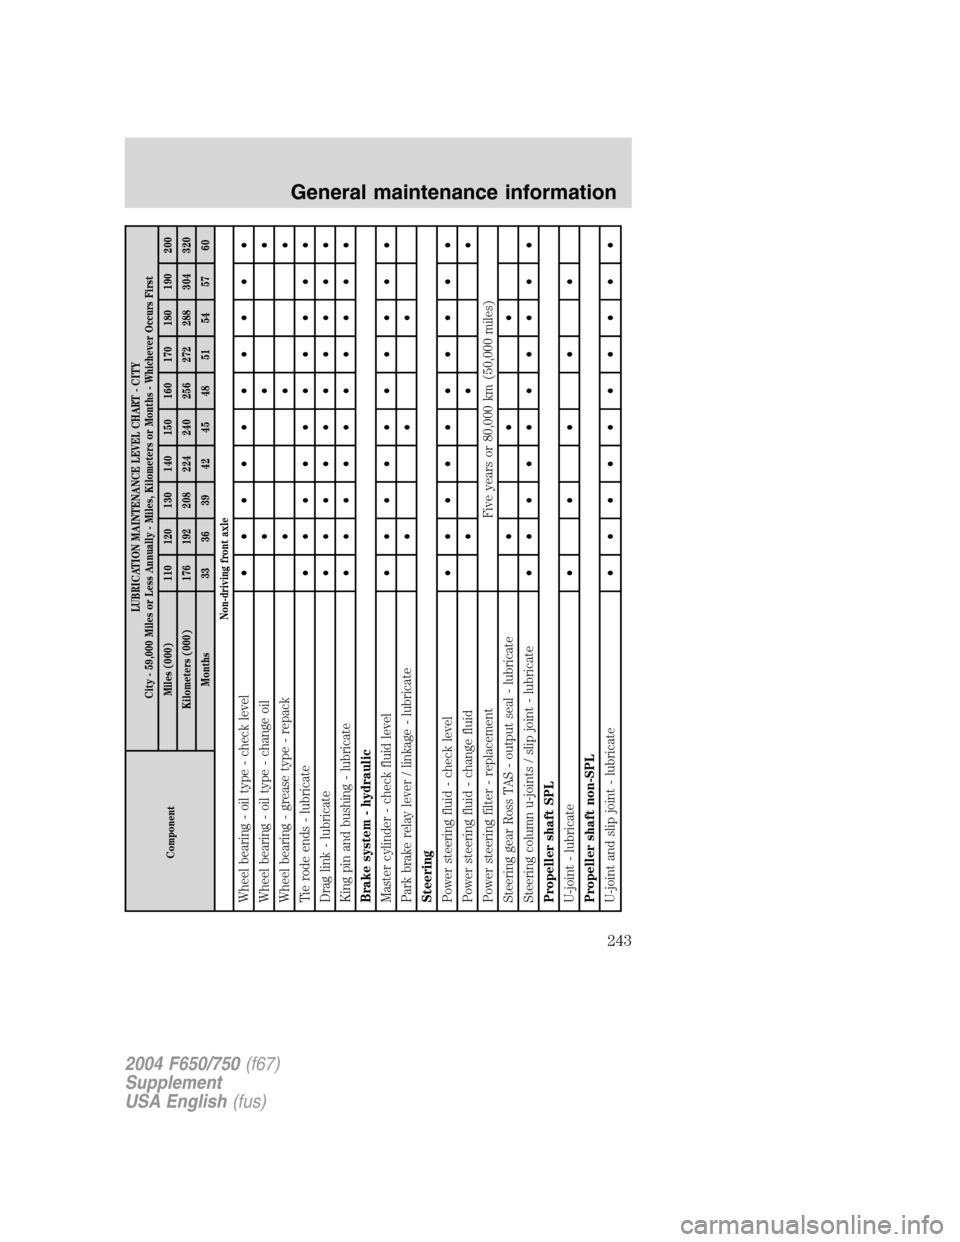 FORD F650 2004 11.G Owners Manual ComponentLUBRICATION MAINTENANCE LEVEL CHART - CITY
City - 59,000 Miles or Less Annually - Miles, Kilometers or Months - Whichever Occurs First
Miles (000) 110 120 130 140 150 160 170 180 190 200
Kilo